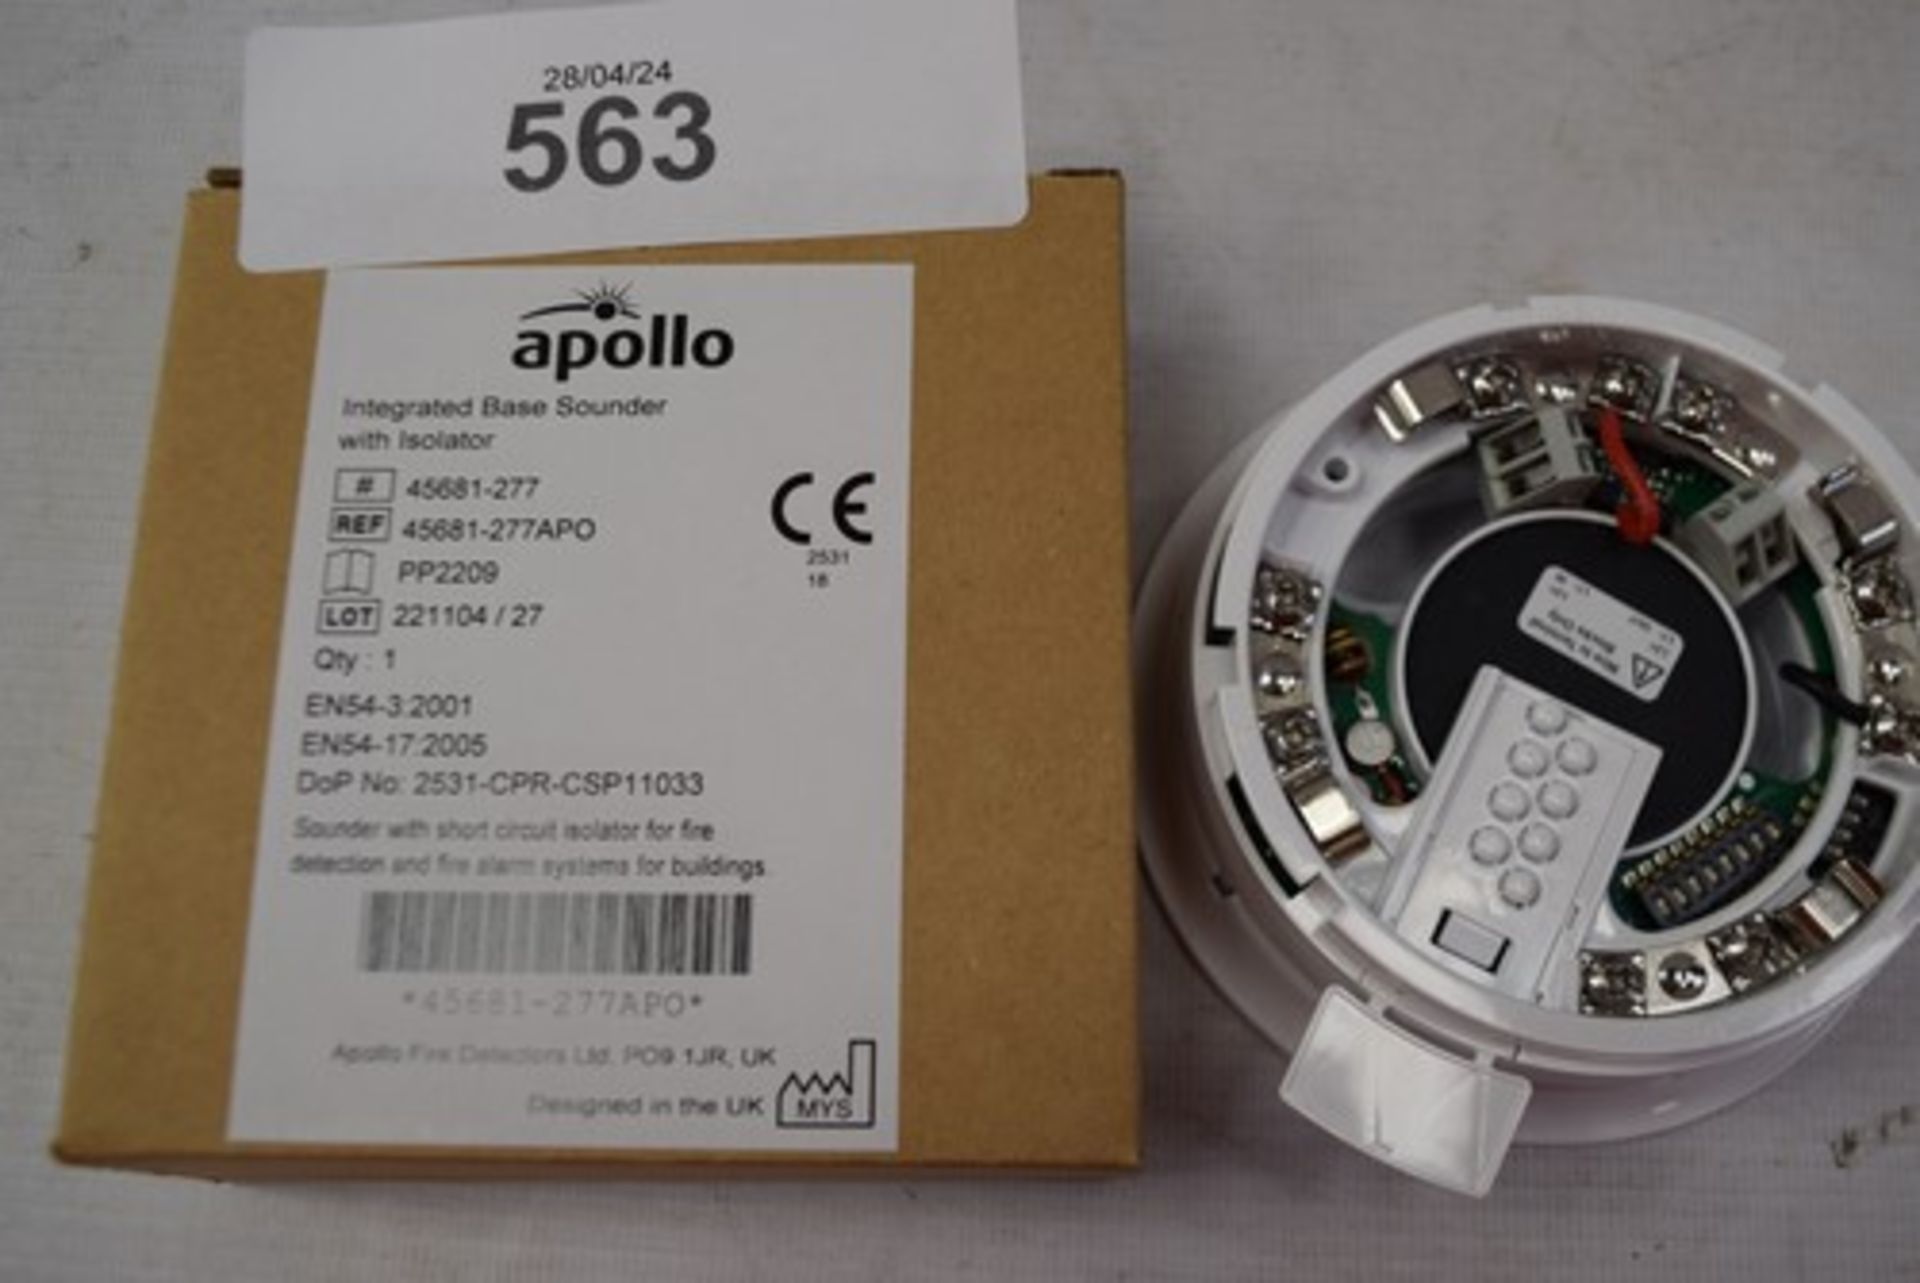 12 x Apollo integrated base sounders with isolators, Ref:- 45681-277APO - new in box (GS5) - Image 2 of 2